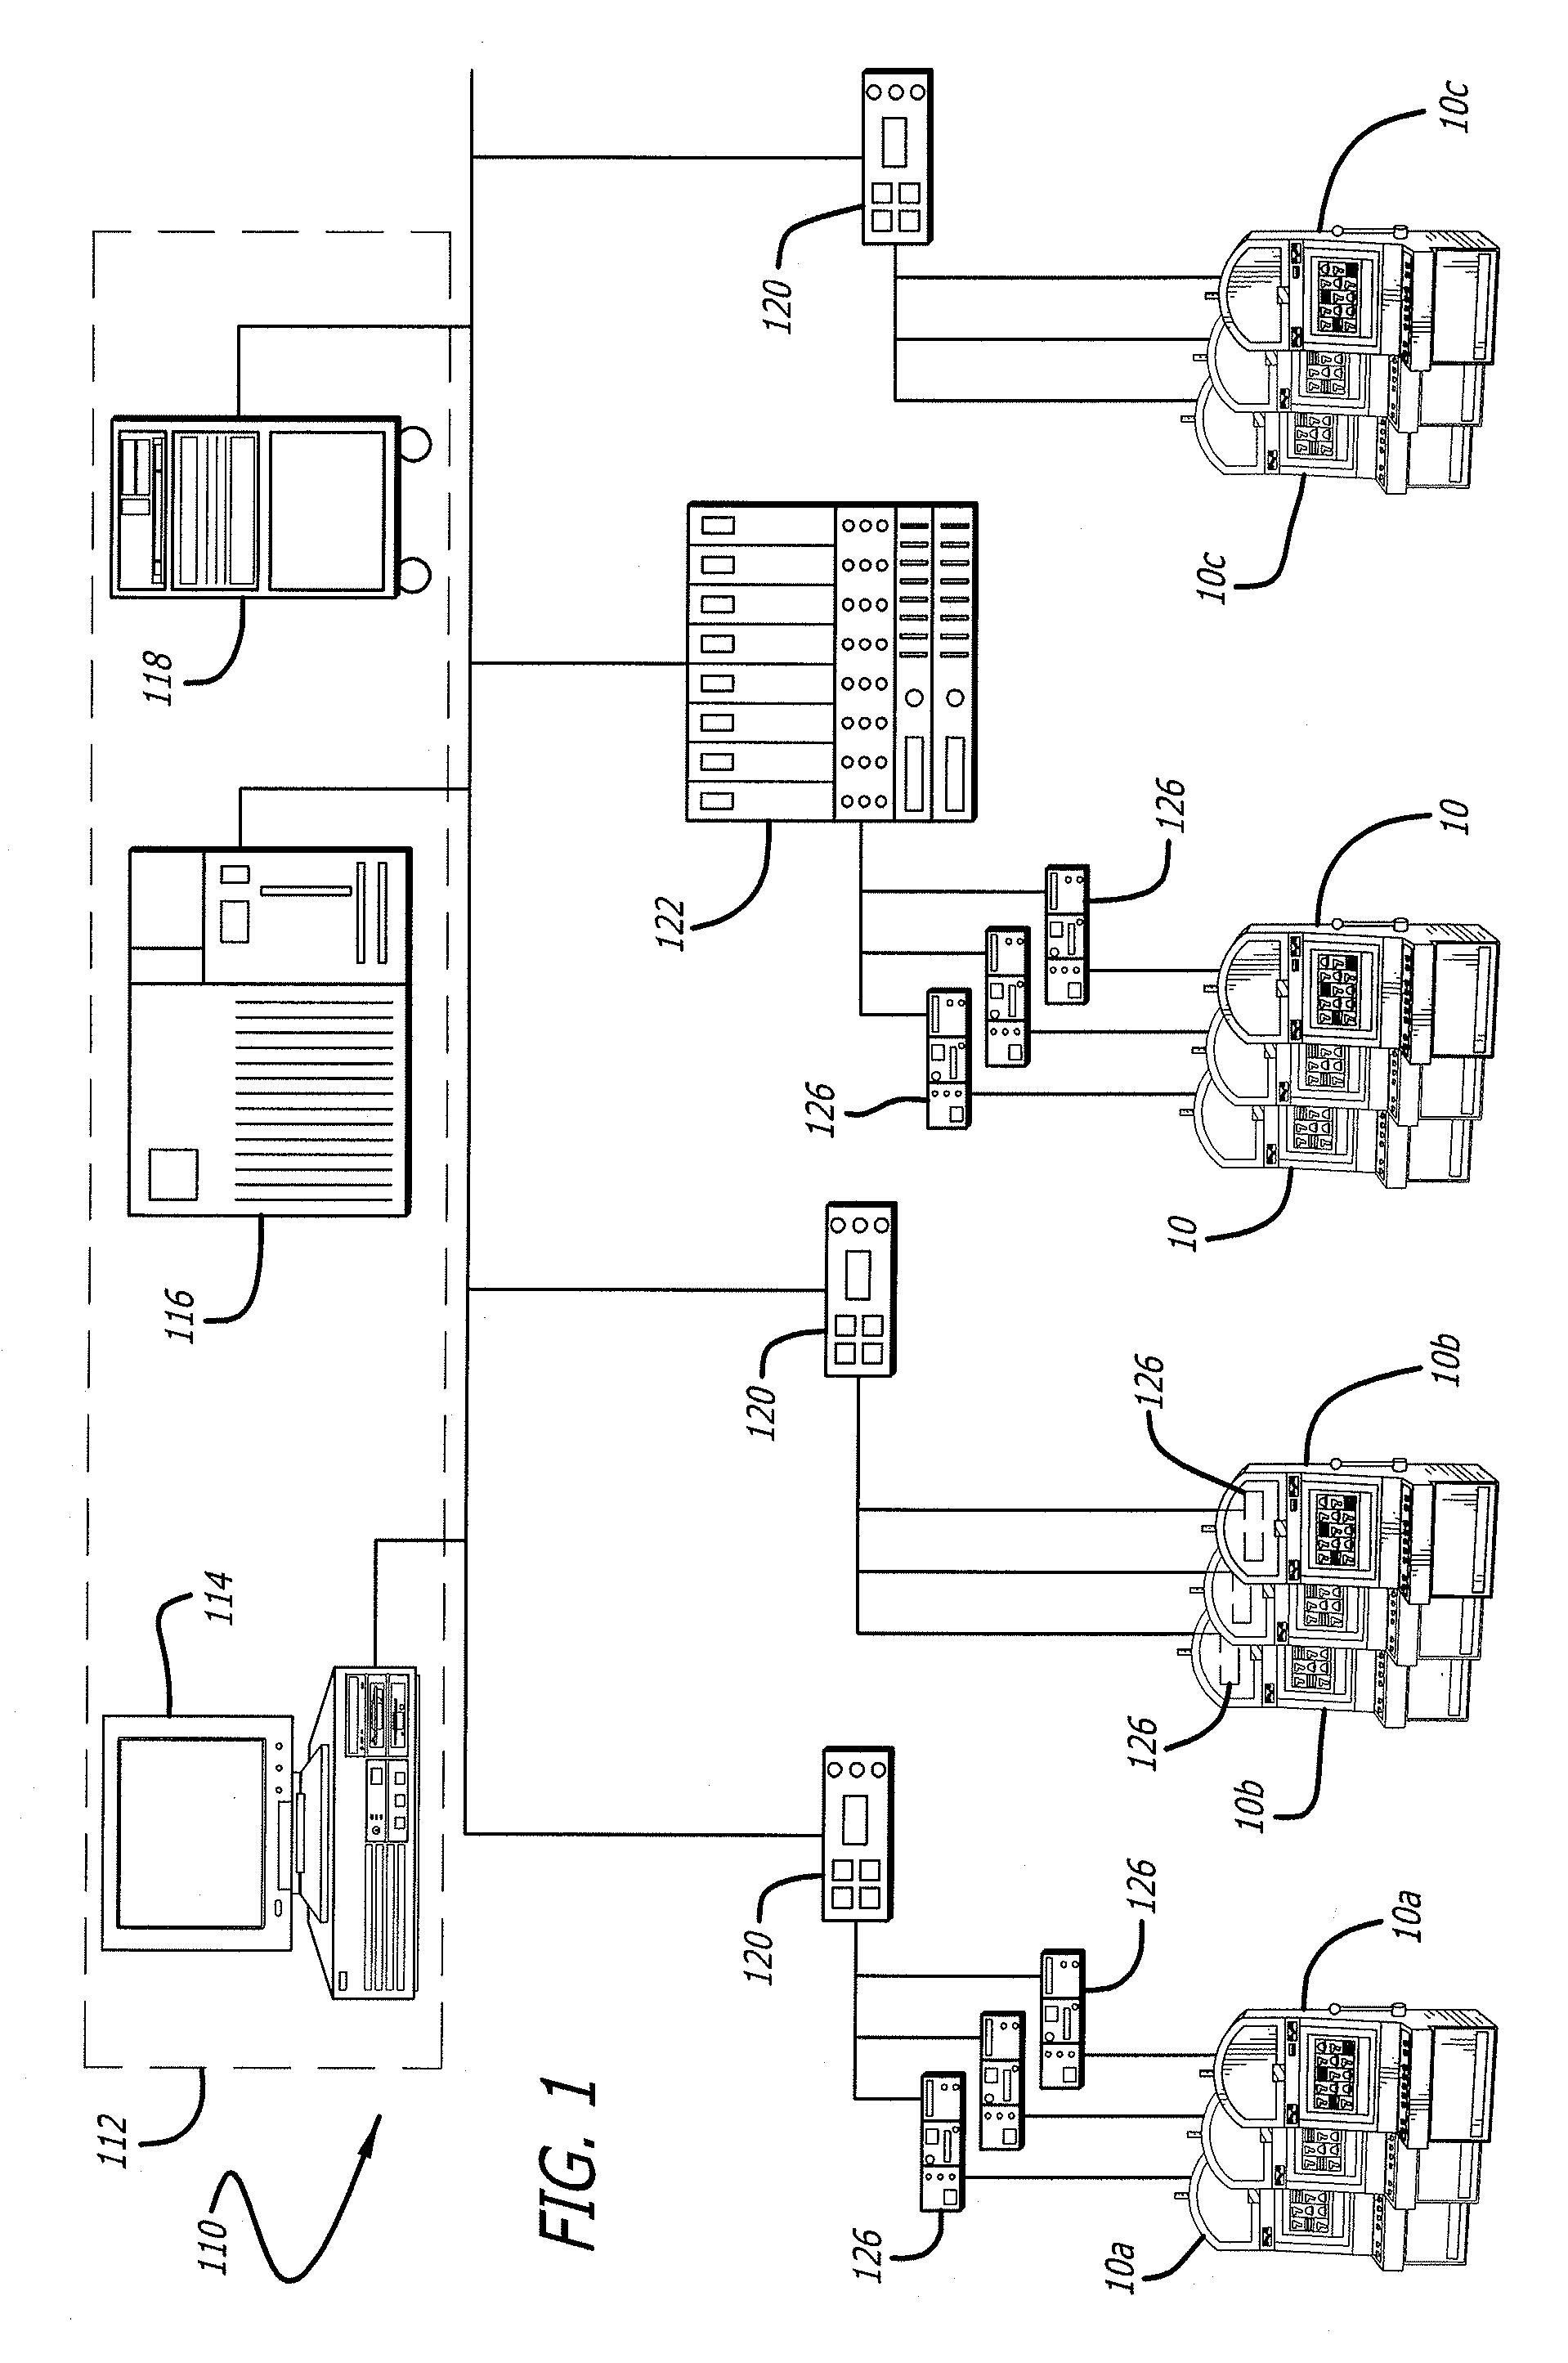 System for managing gaming devices